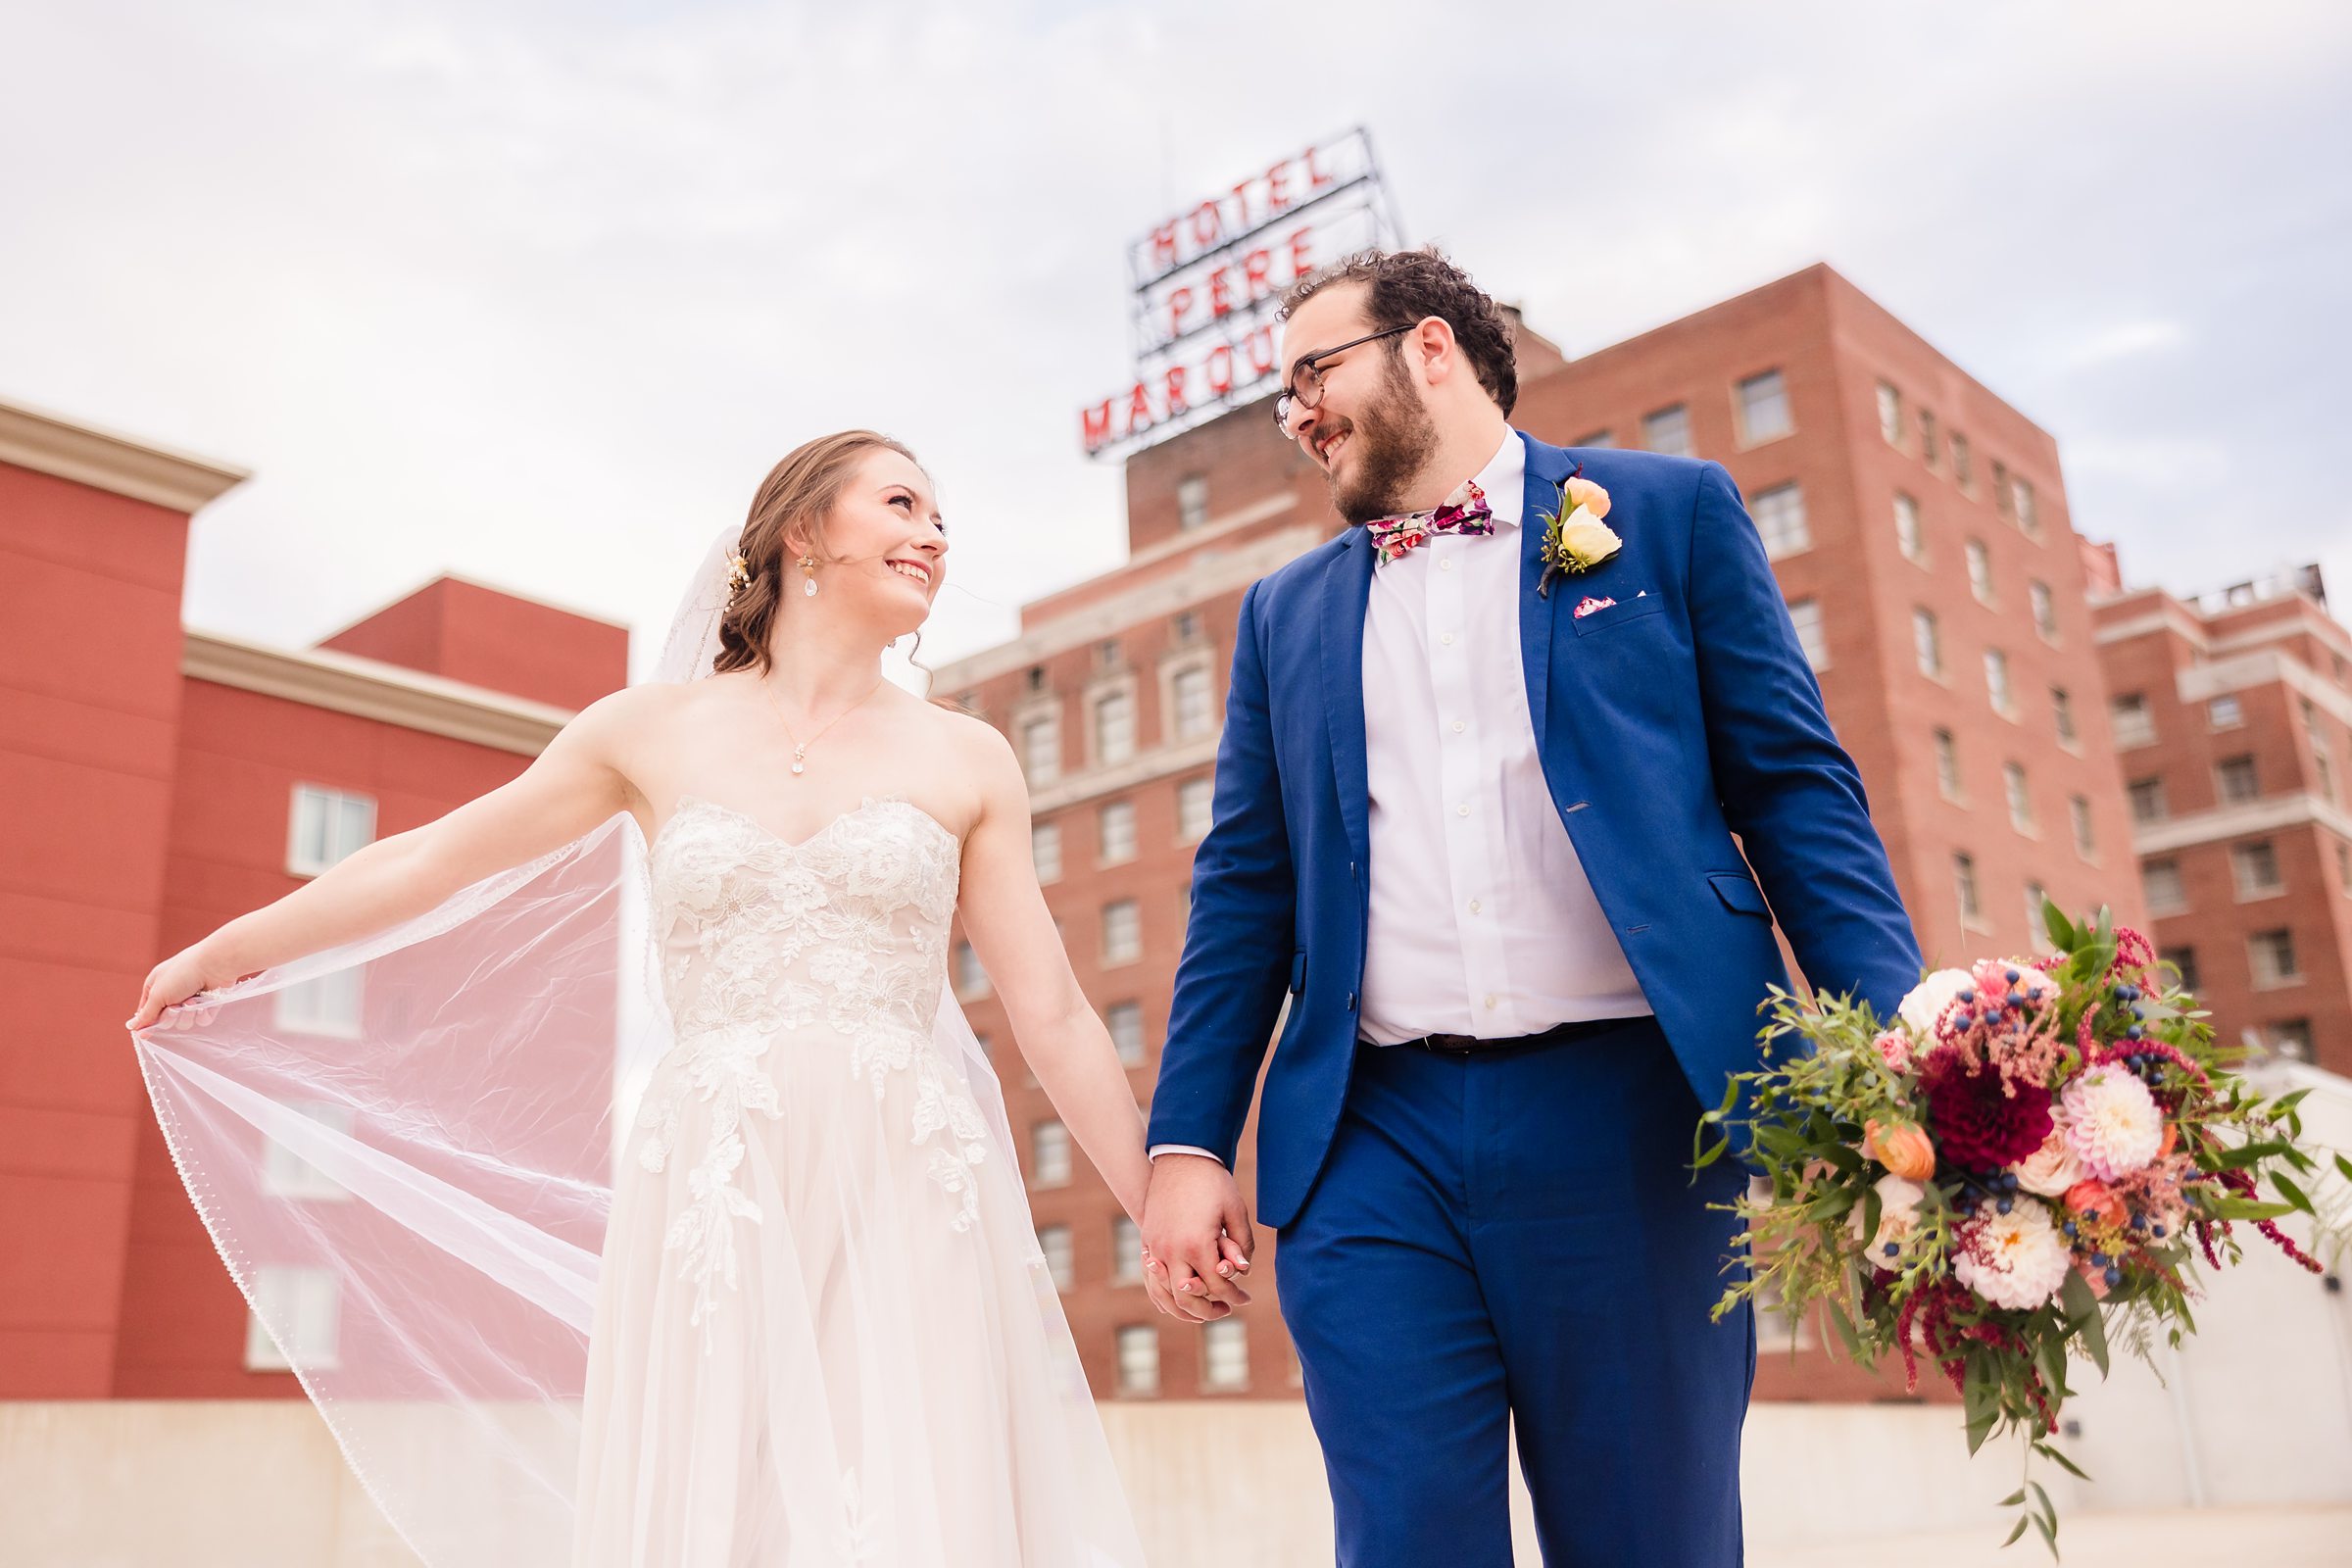 Bride and groom celebrate getting married at the Hotel Pere Marquette in Peoria, Illinois.